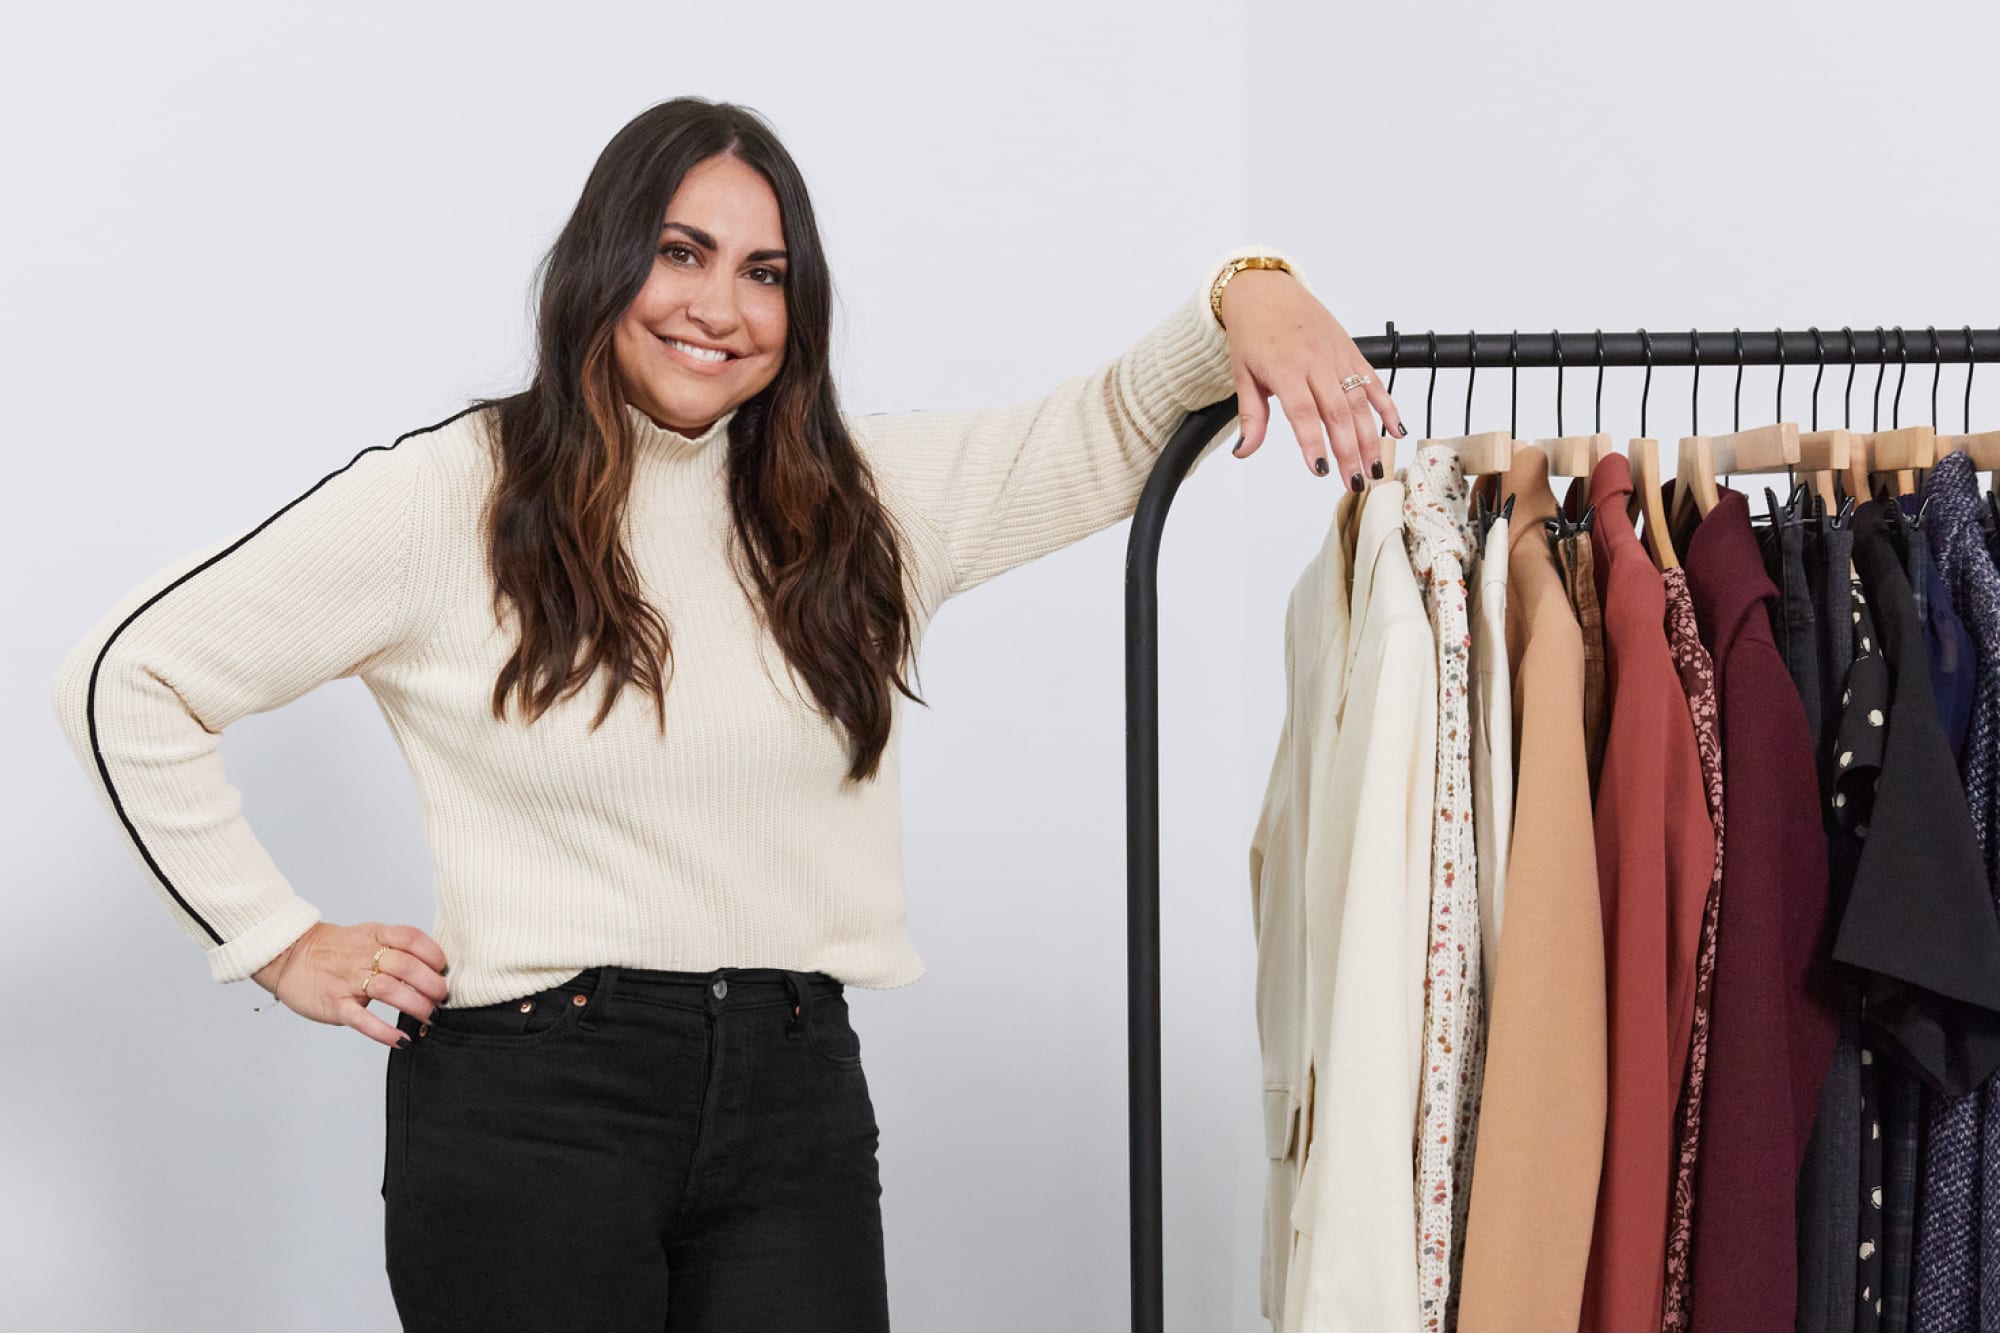 A stylist stands proudly with a rack of clothes.